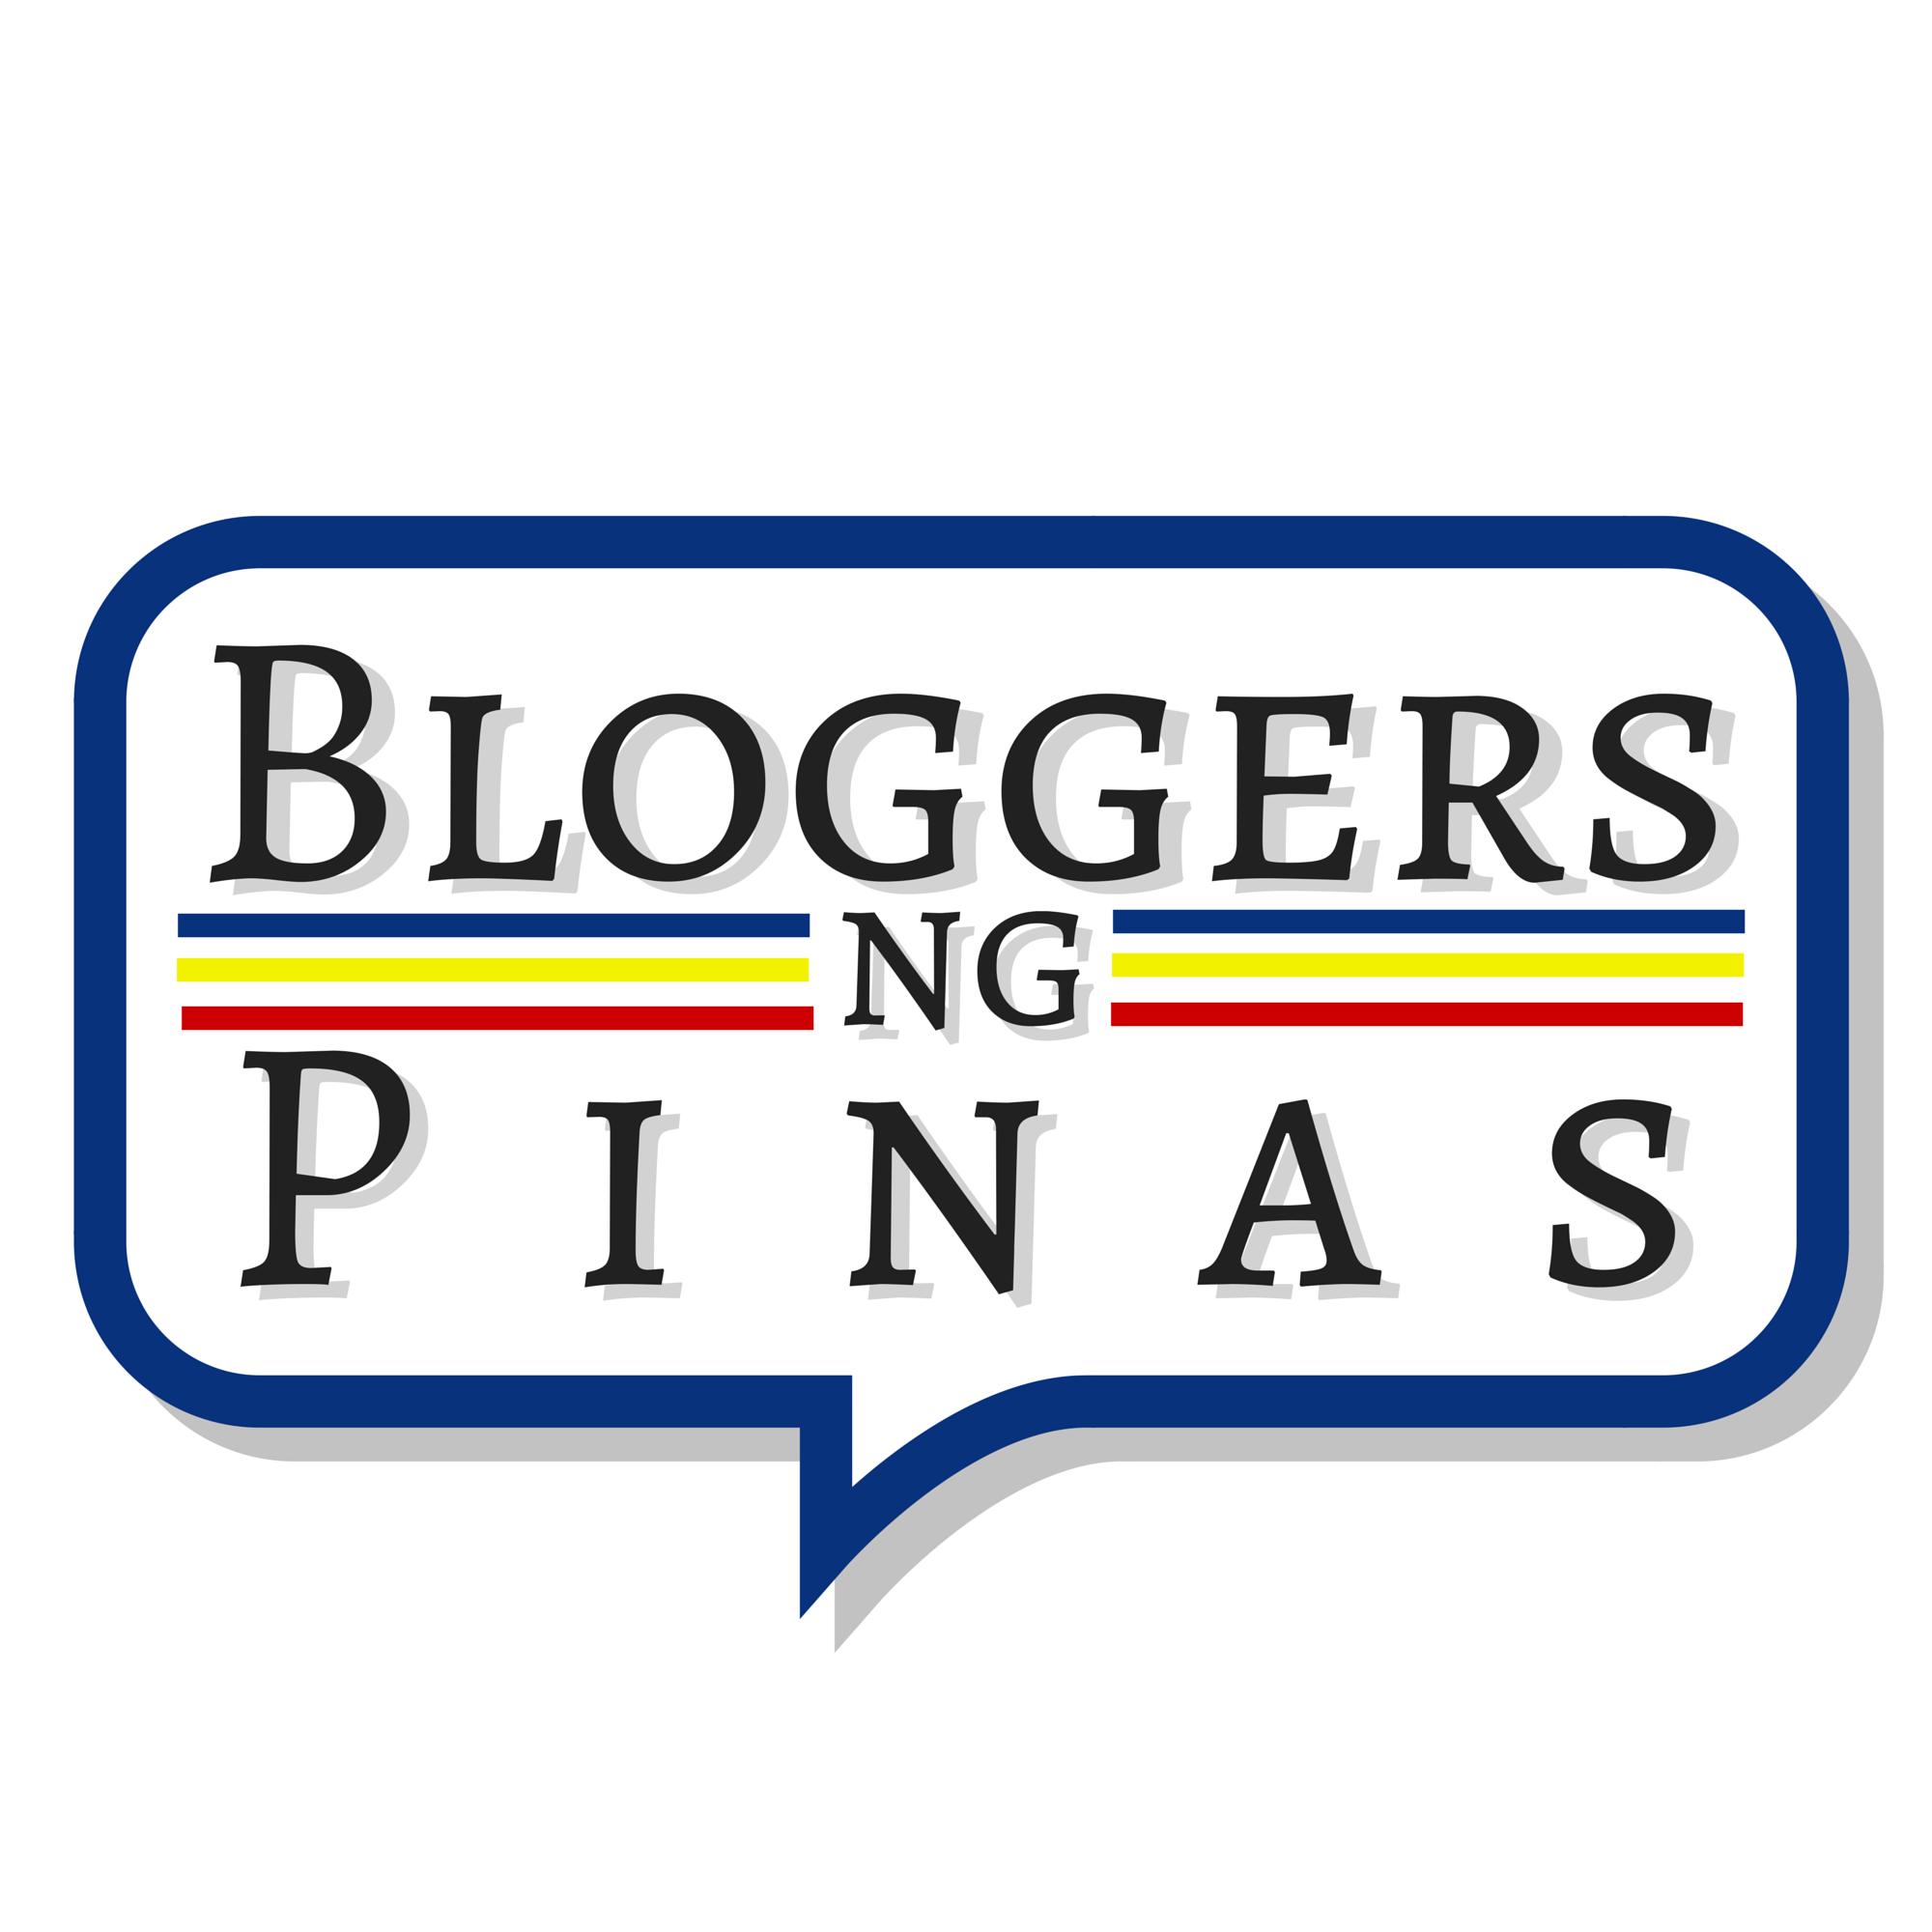 A Community of #Filipino #Bloggers that aims to Support & Further the Skills of Bloggers and Writers thru Workshops, Writing Gigs and Related Events.